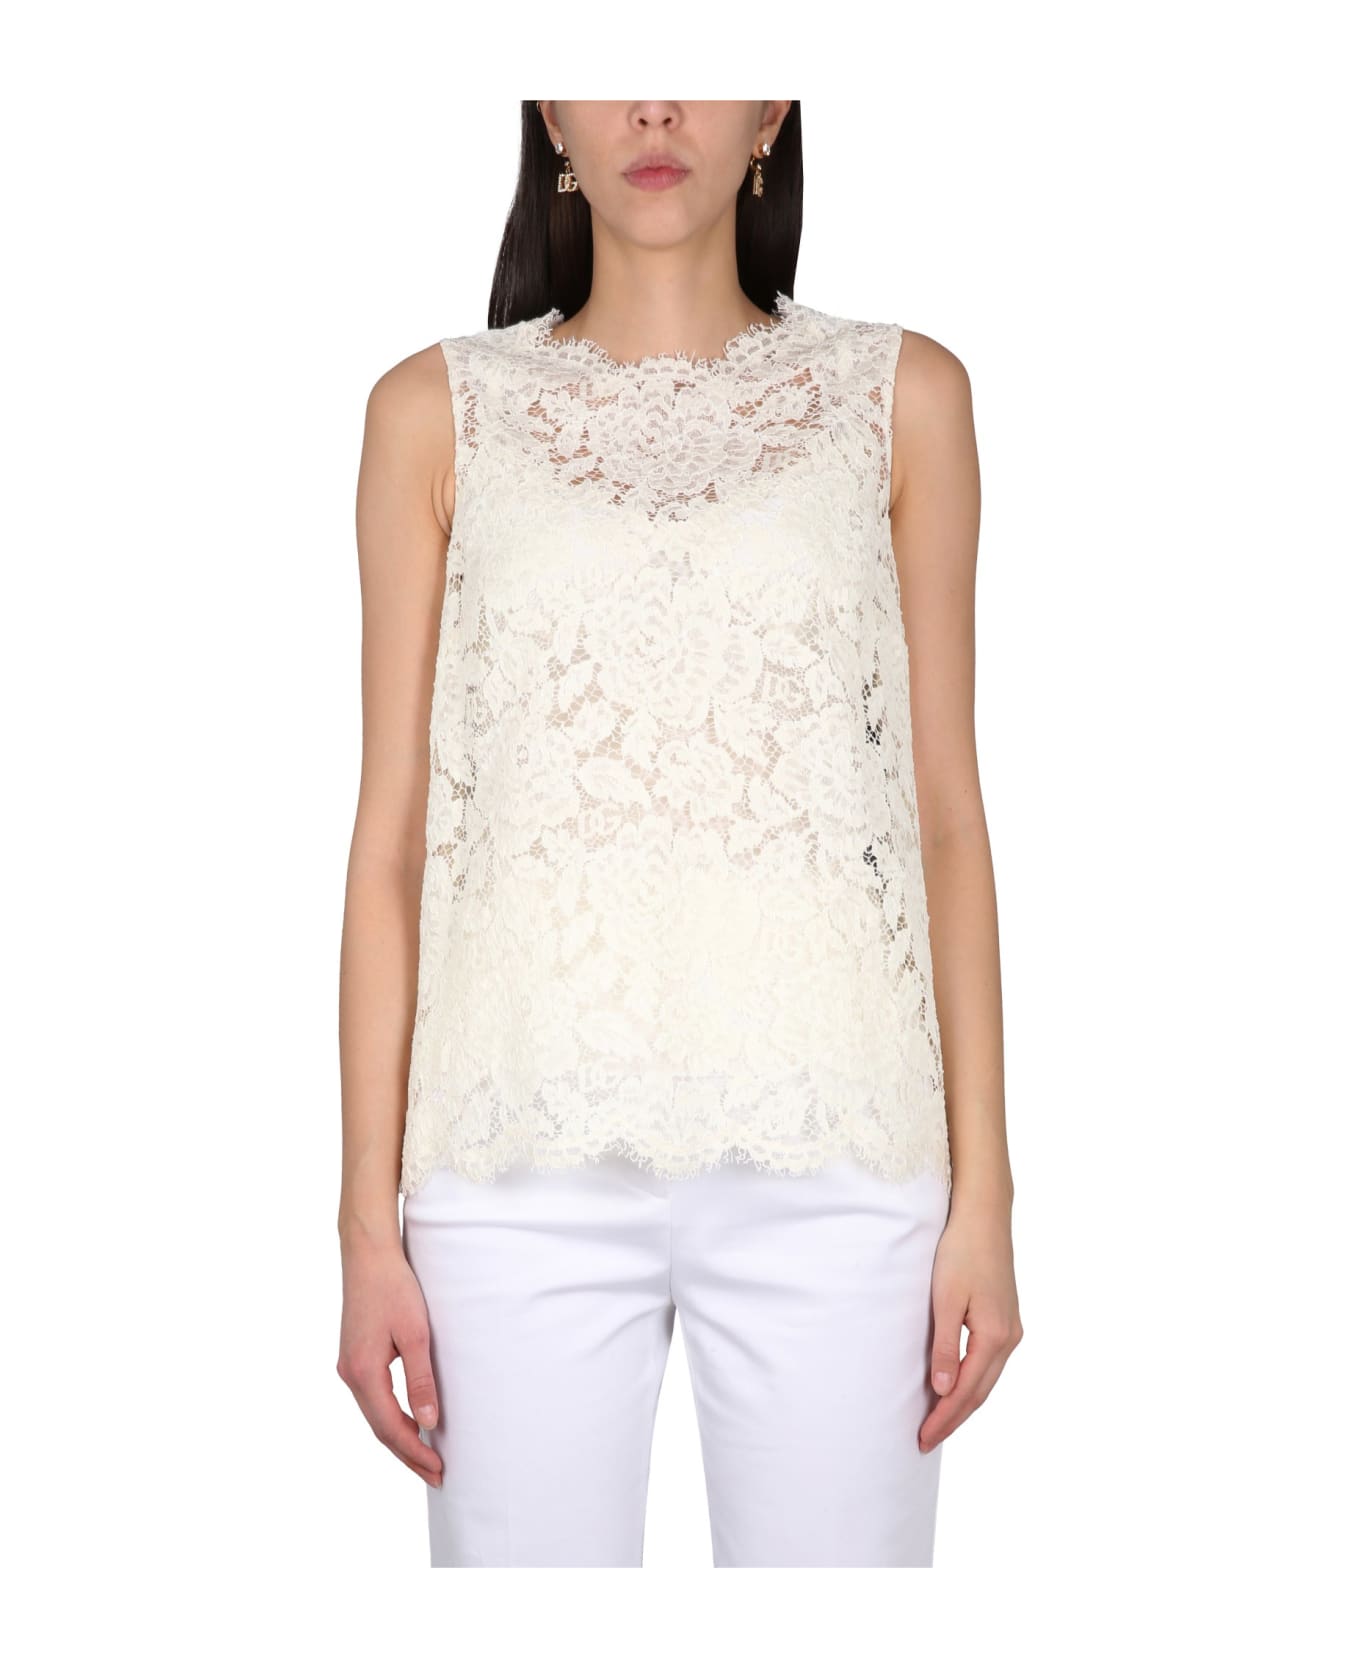 Dolce & Gabbana Logoed Stretch Lace Top - Ivory タンクトップ